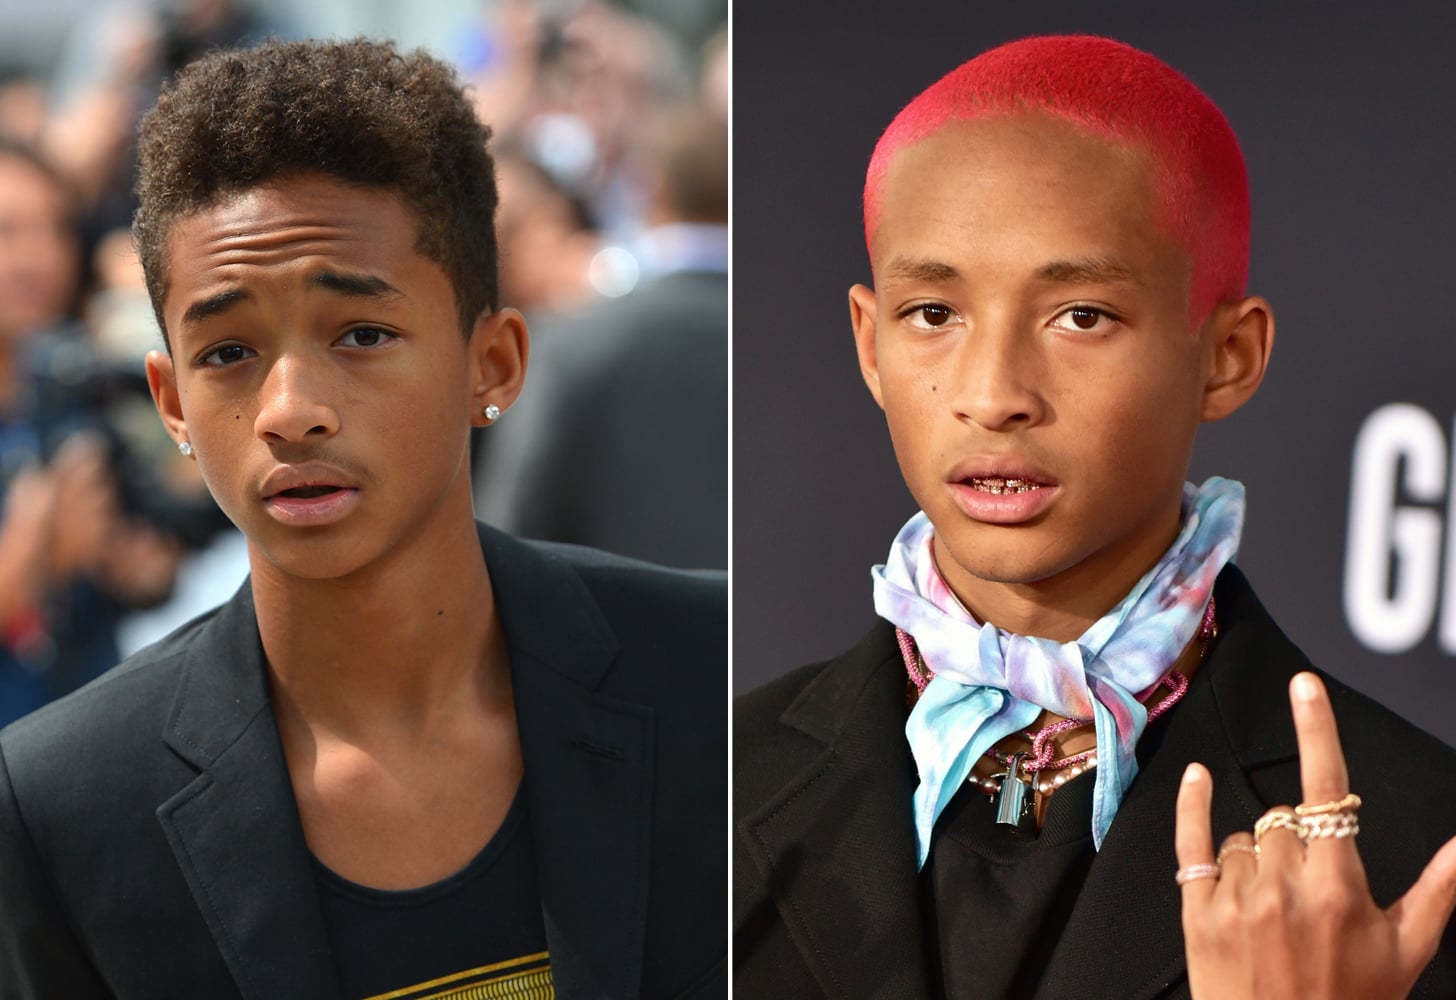 Jaden Smith with cut hair in hand at 2017 MET Gala